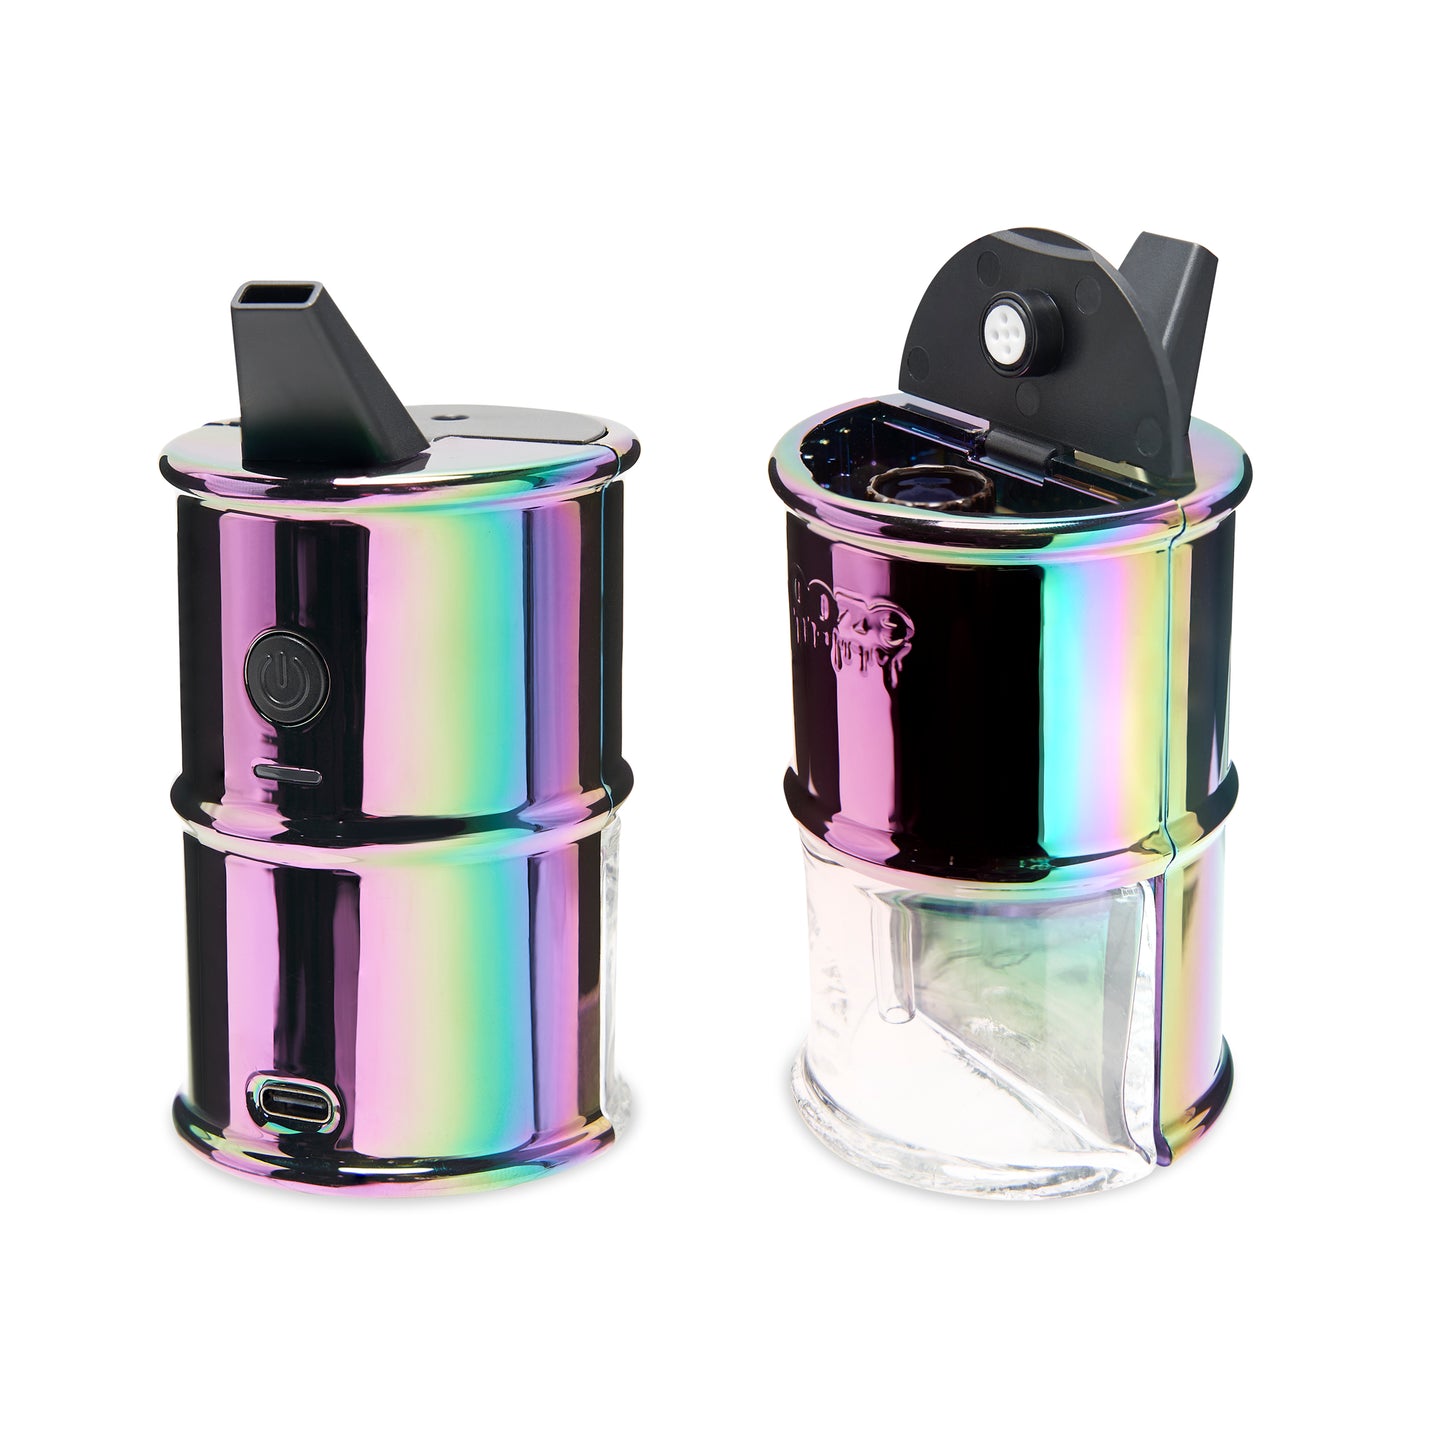 Two of the Rainbow Ooze Electro Barrel E-Rigs are side by side to show the front and back. The back is shown on the left with the button visible, and the front is on the right with the water chamber shown and lid lifted.